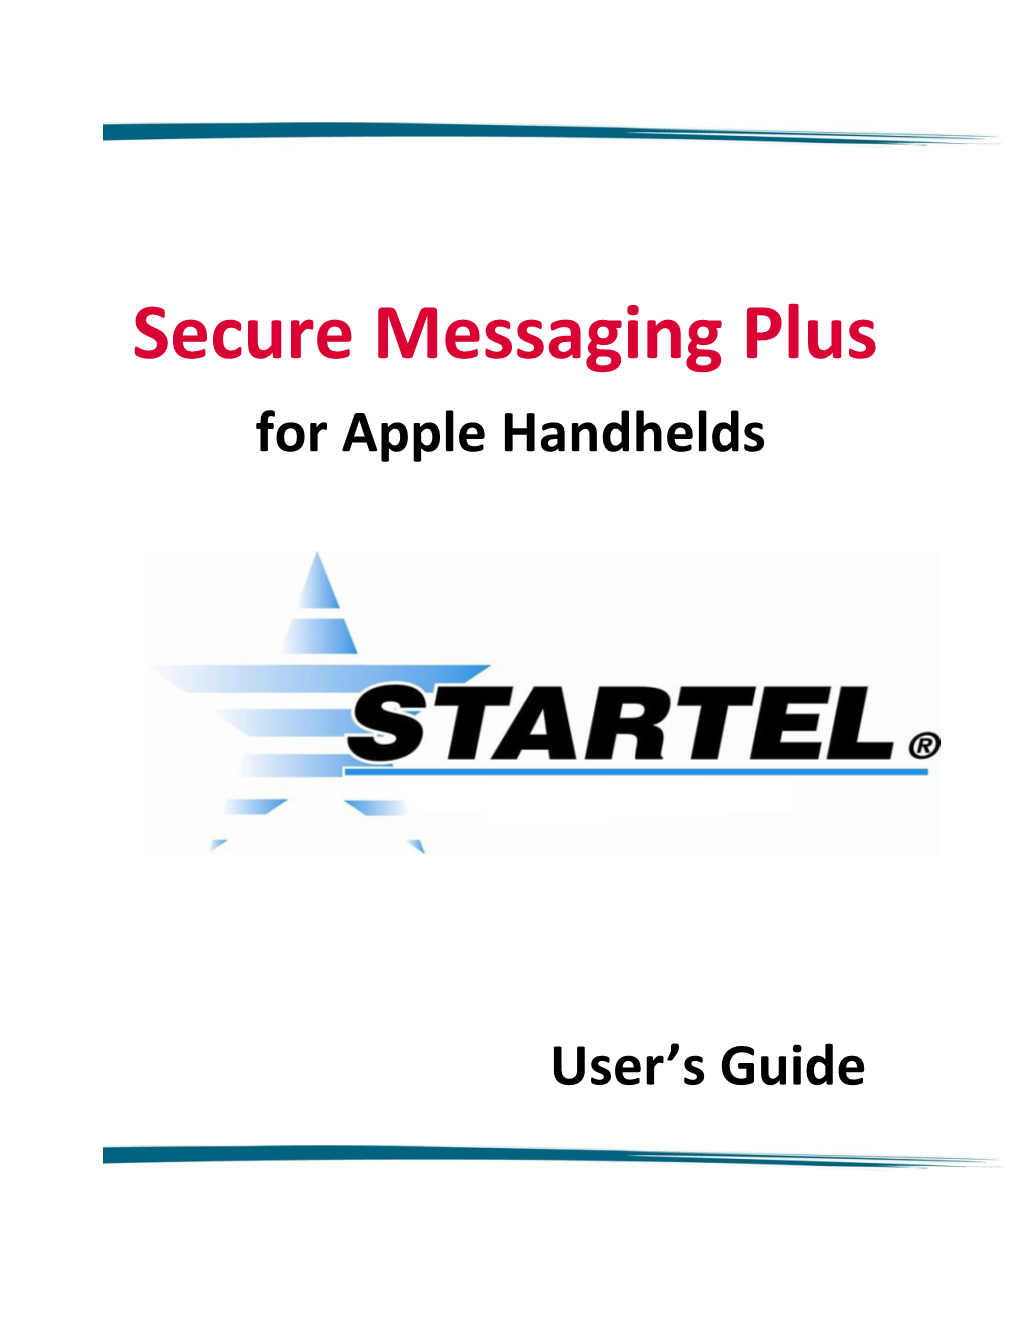 Secure Messaging Plus for Apple Handhelds User's Guide